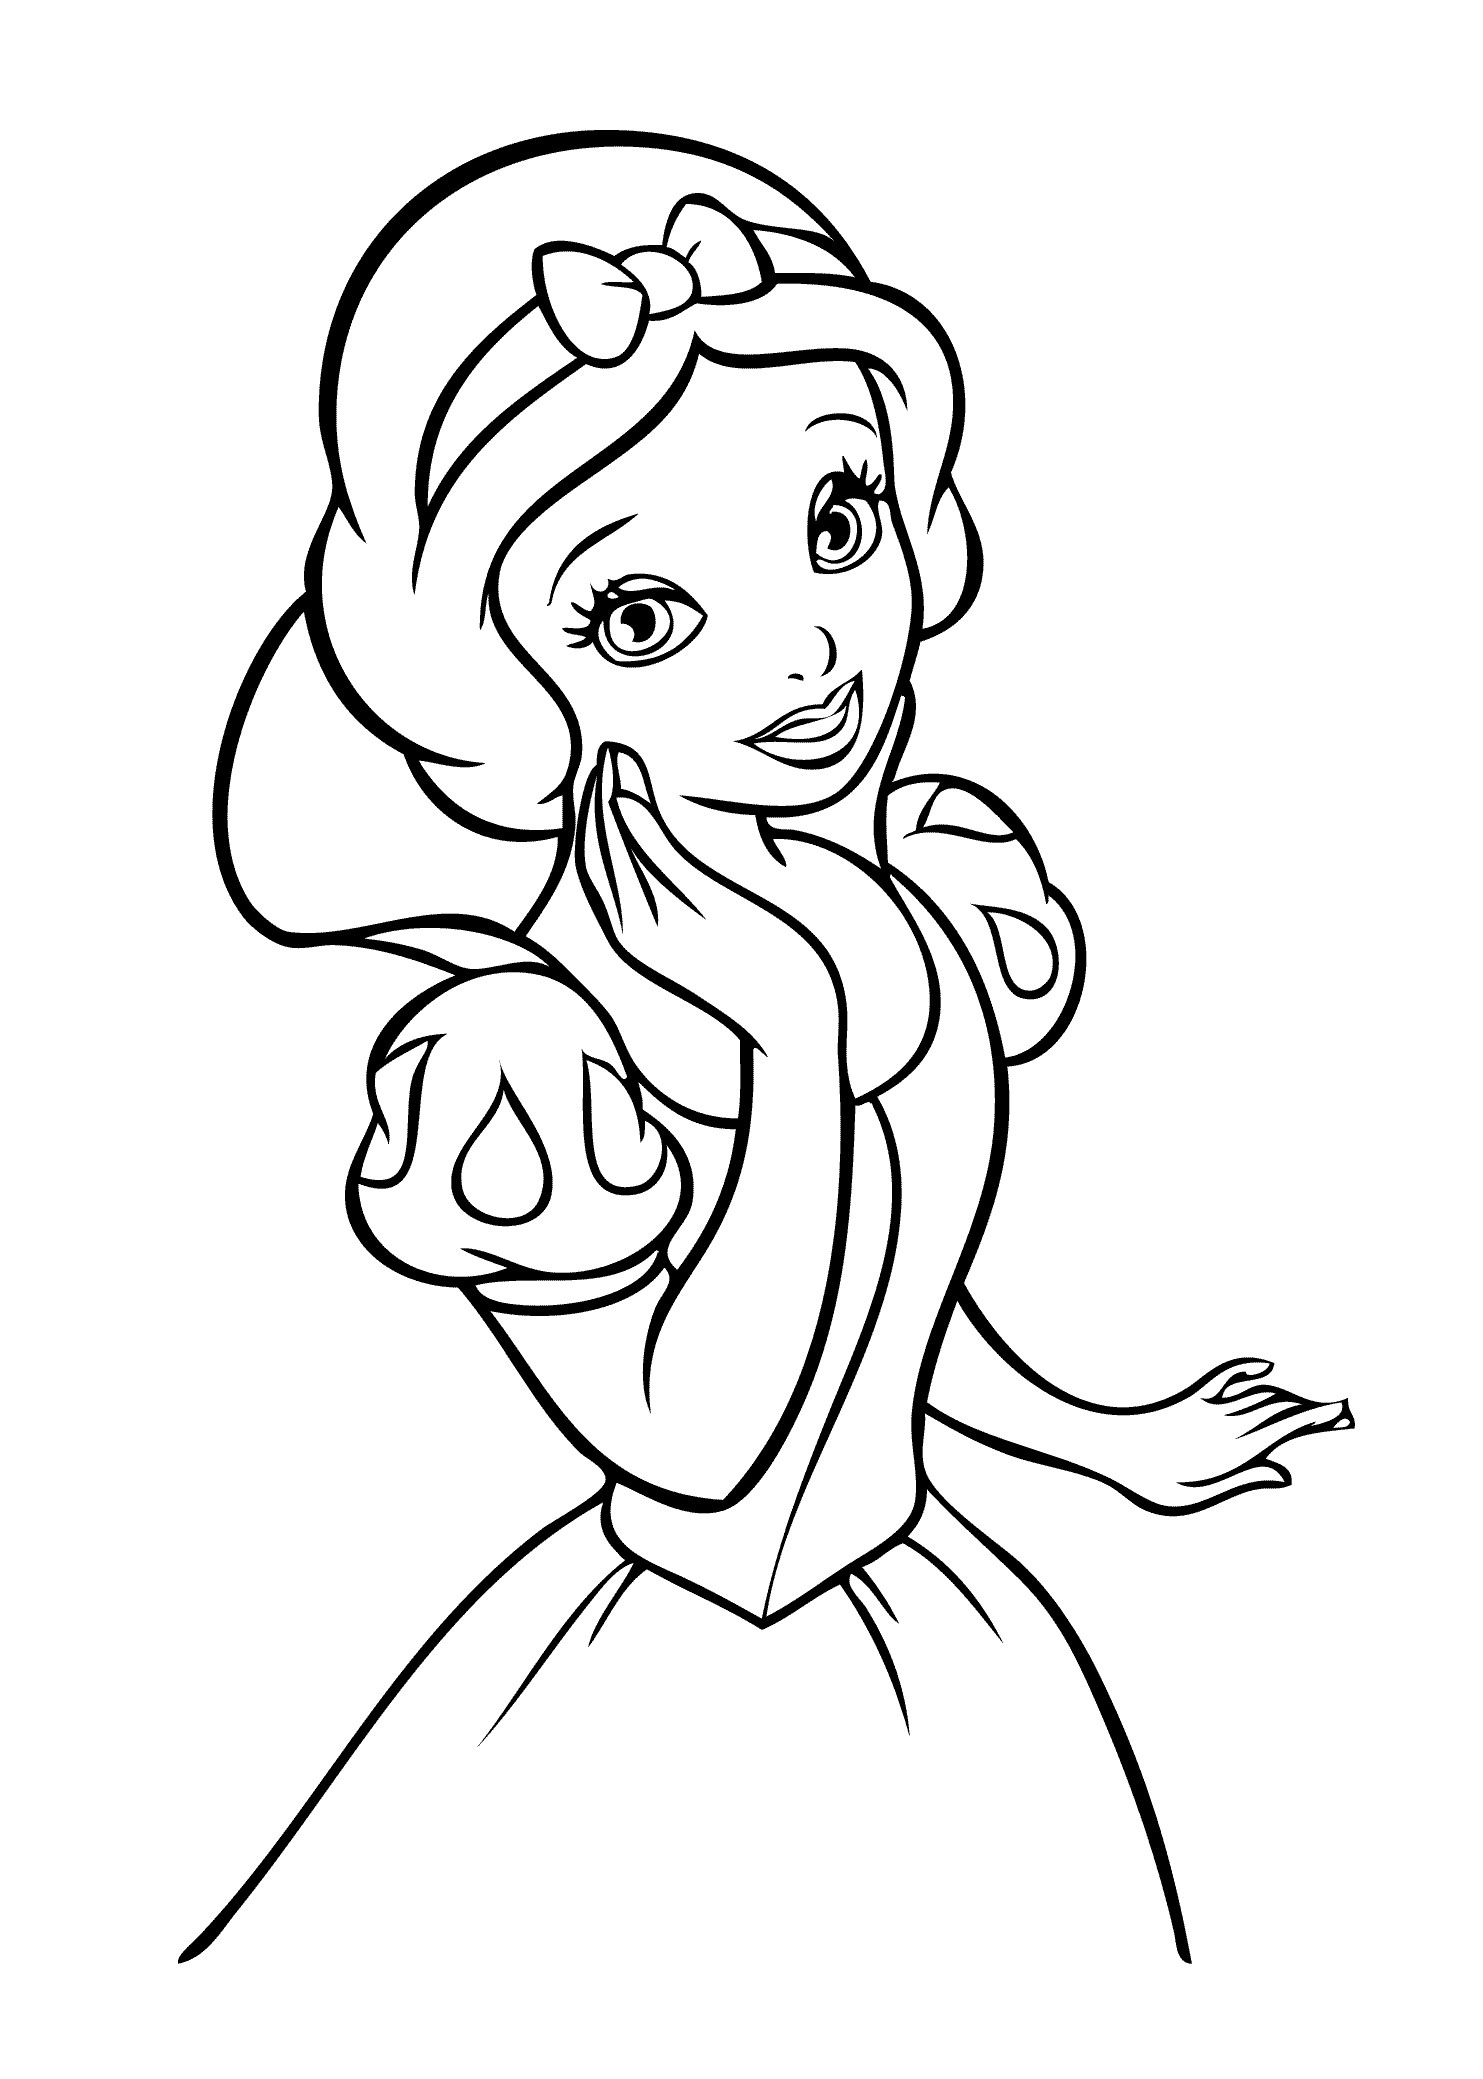 Princess Coloring Sheets For Girls
 Princesse Snow White coloring page for girls printable